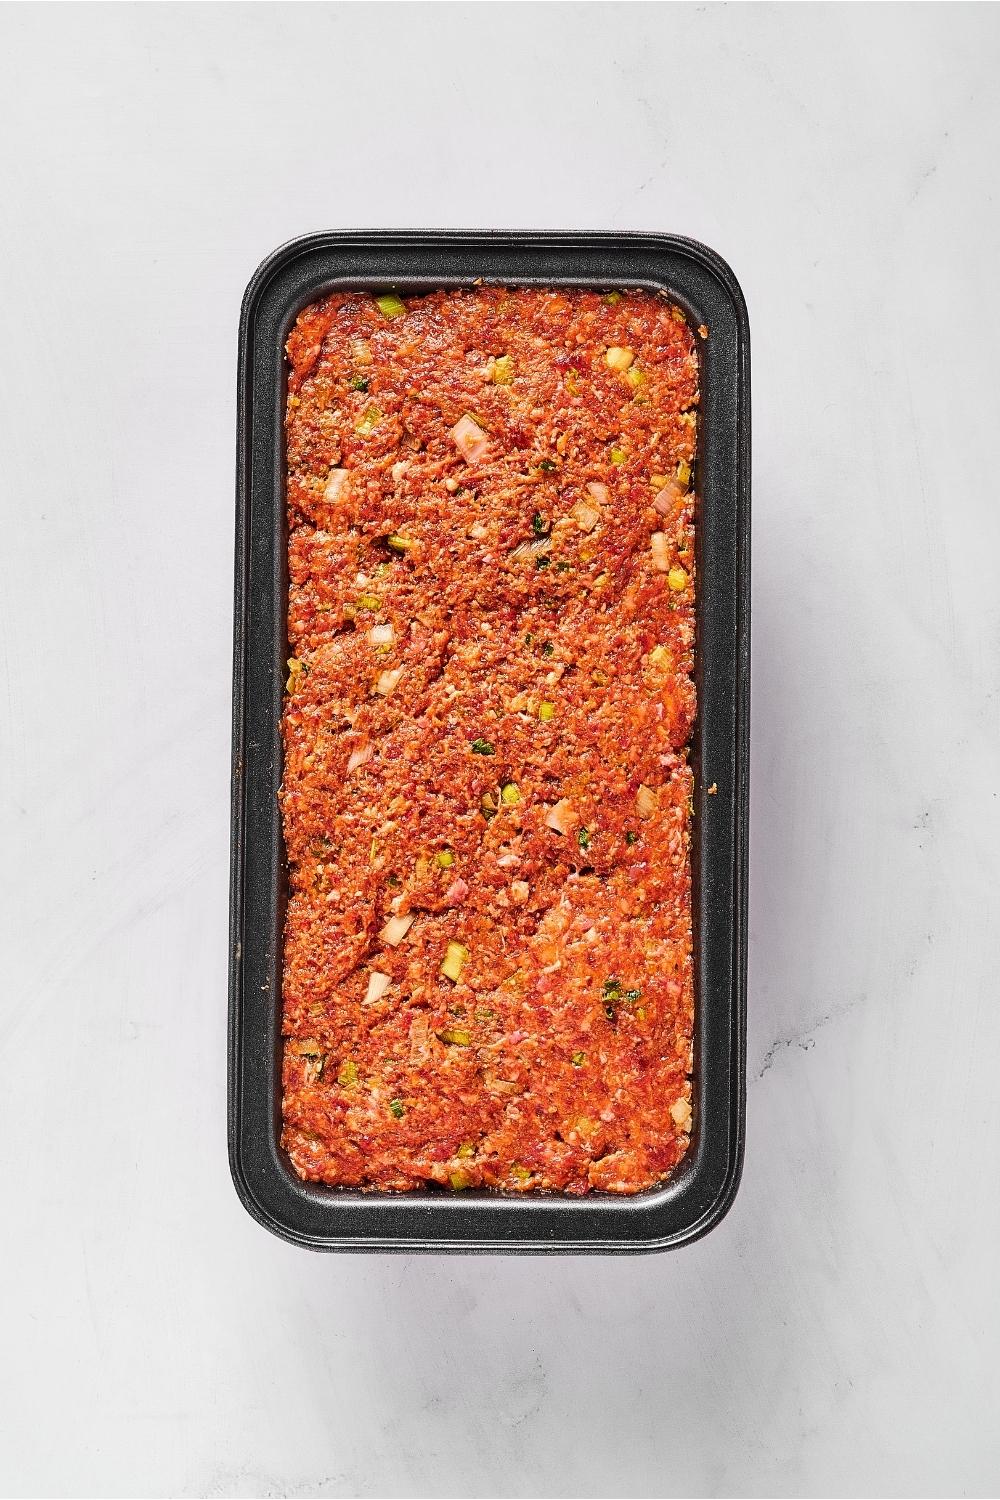 Meatloaf mixture in a loaf pan on top of a white counter.